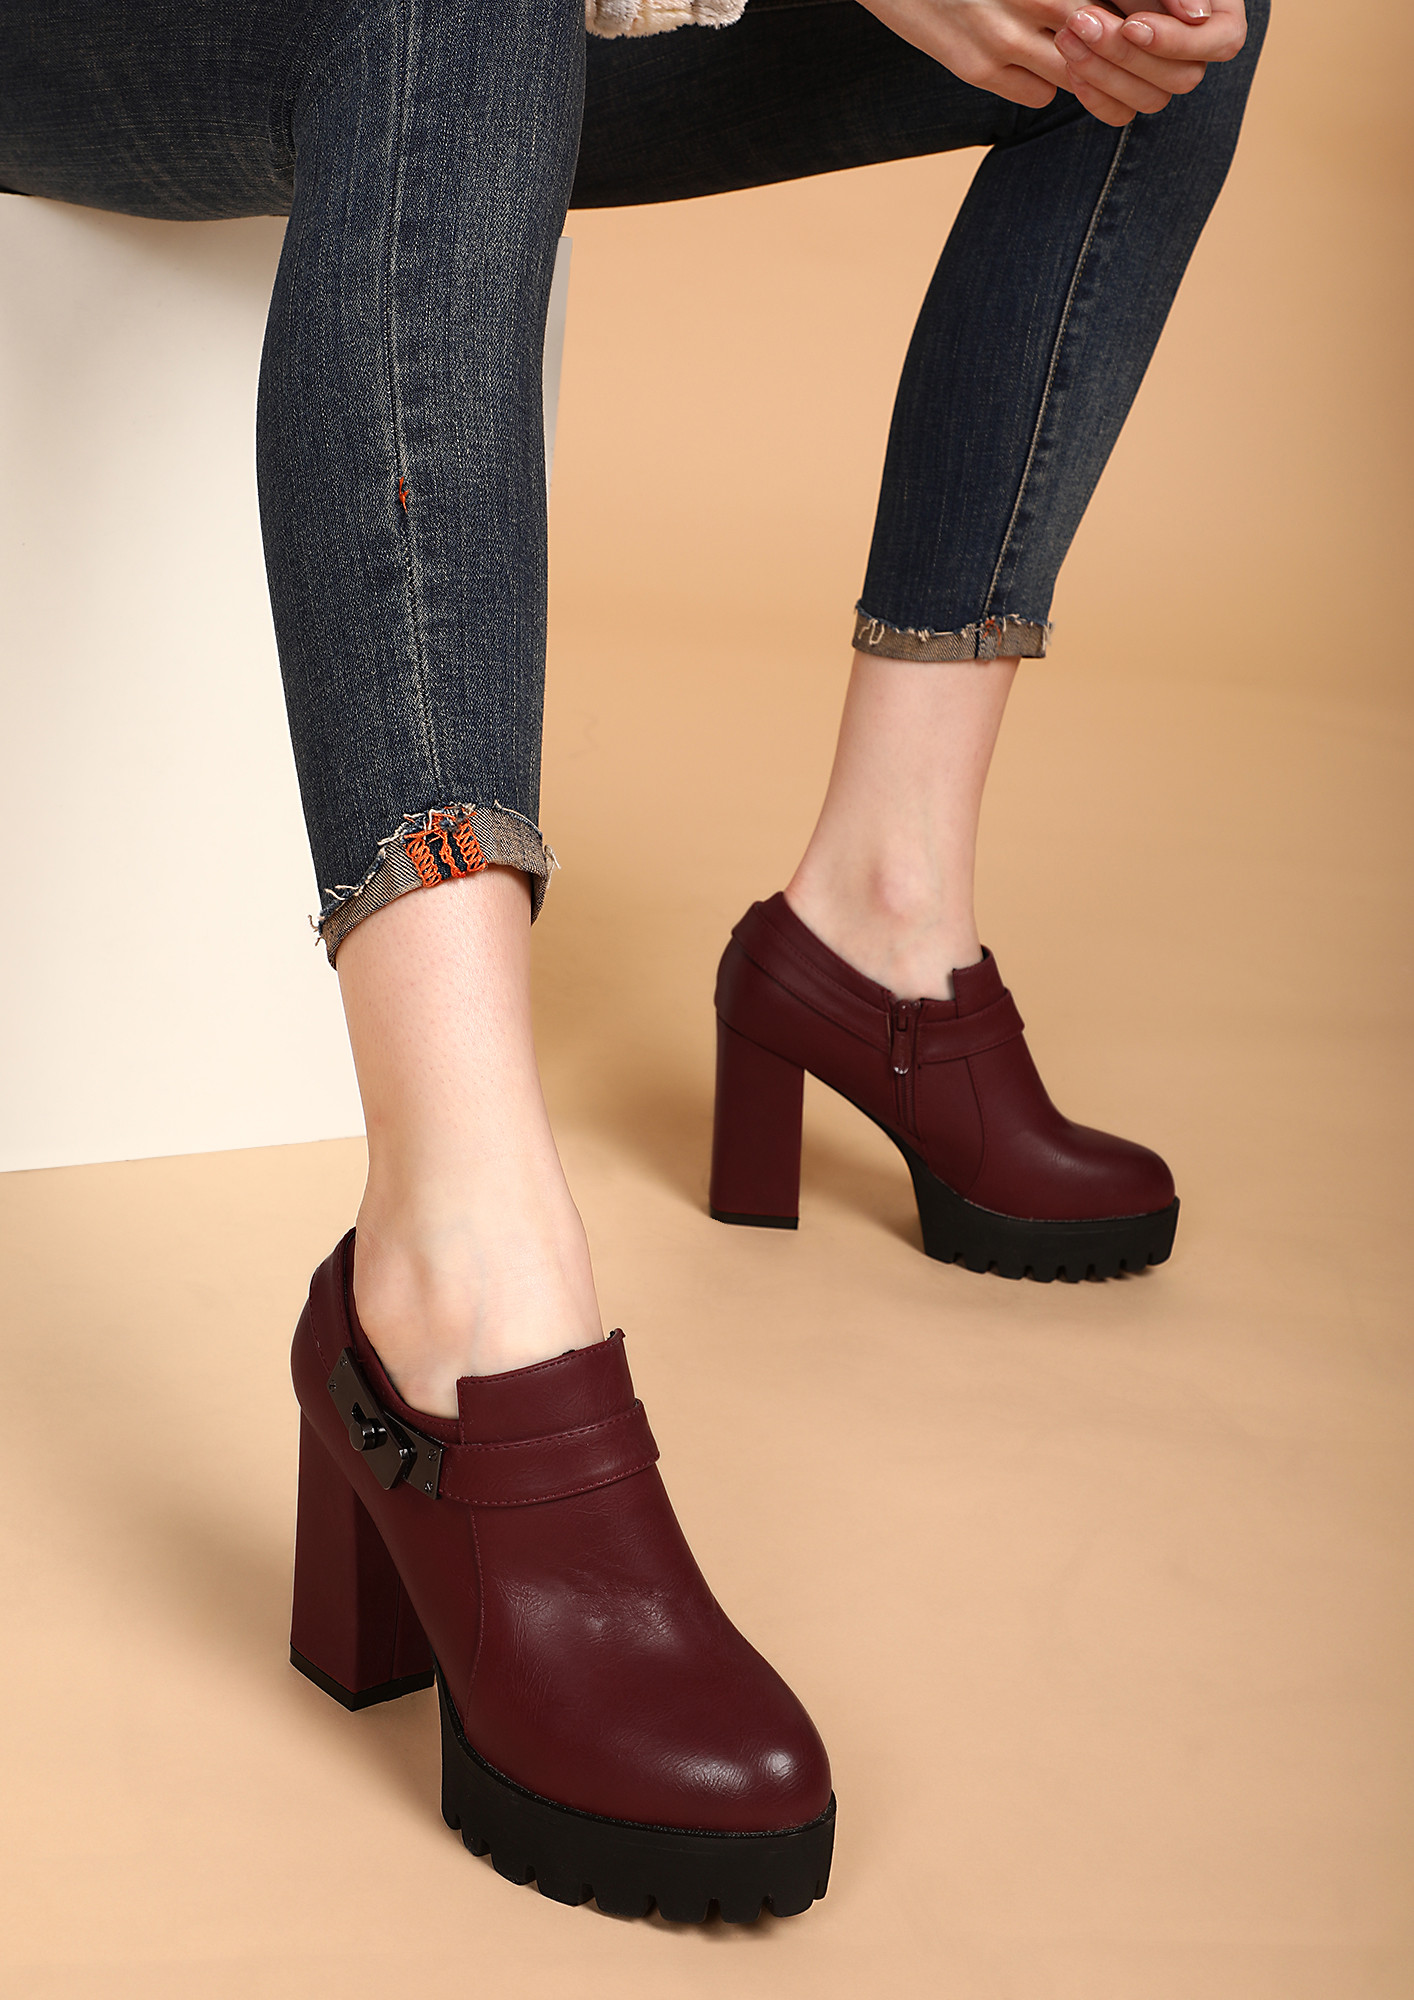 OFFICE TO HAPPY HOURS MAROON ANKLE BOOTS